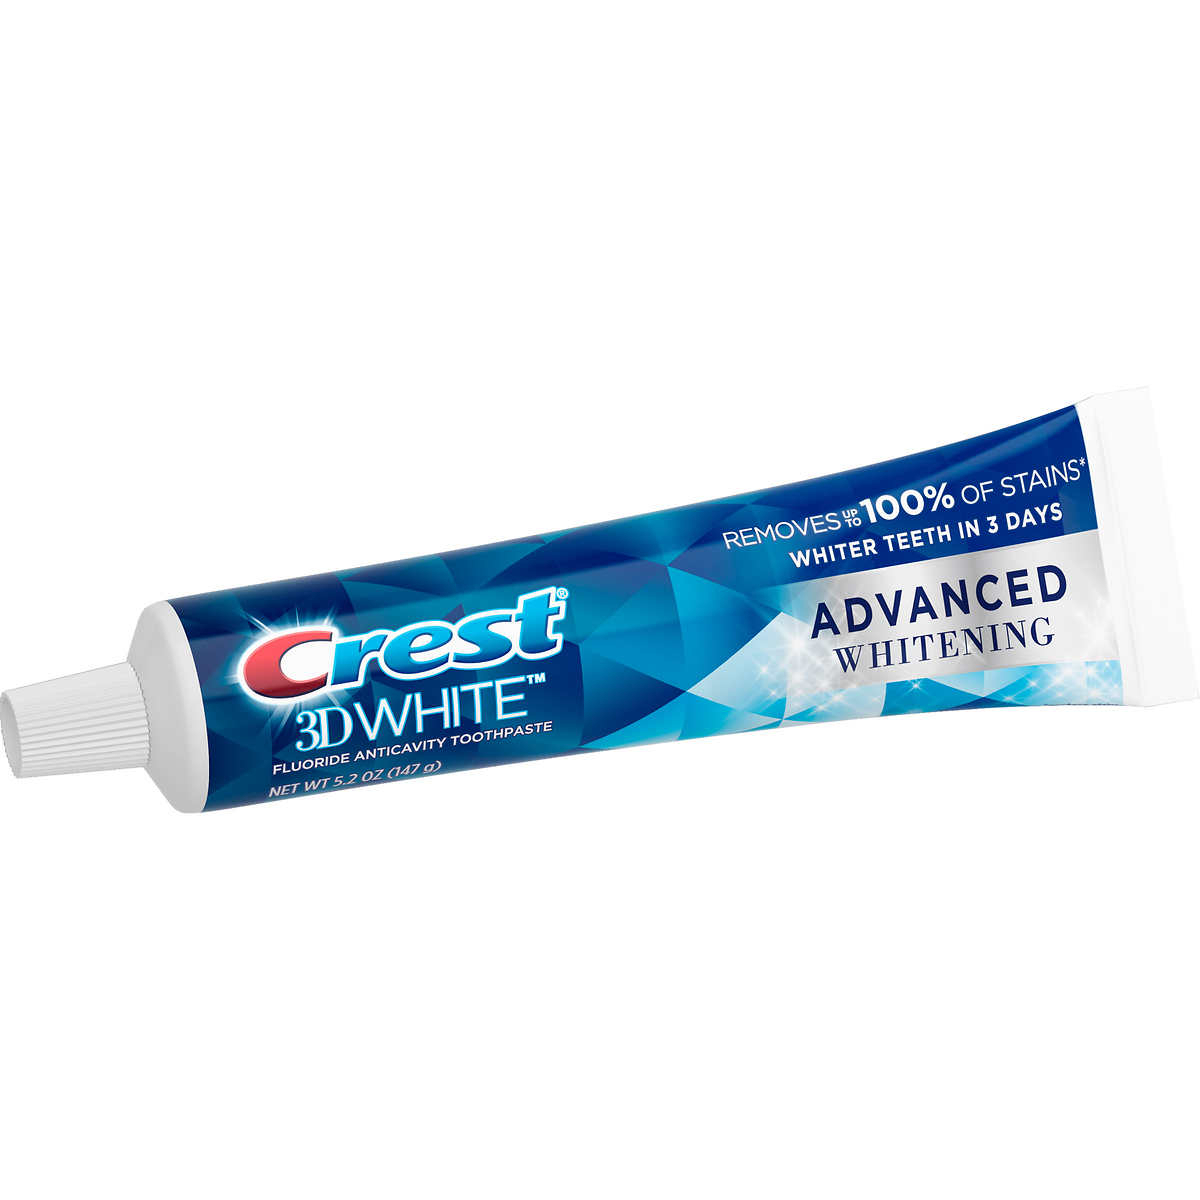 Crest 3D White Advanced Whitening Toothpaste, 5.2 Ounce (Pack Of 5)